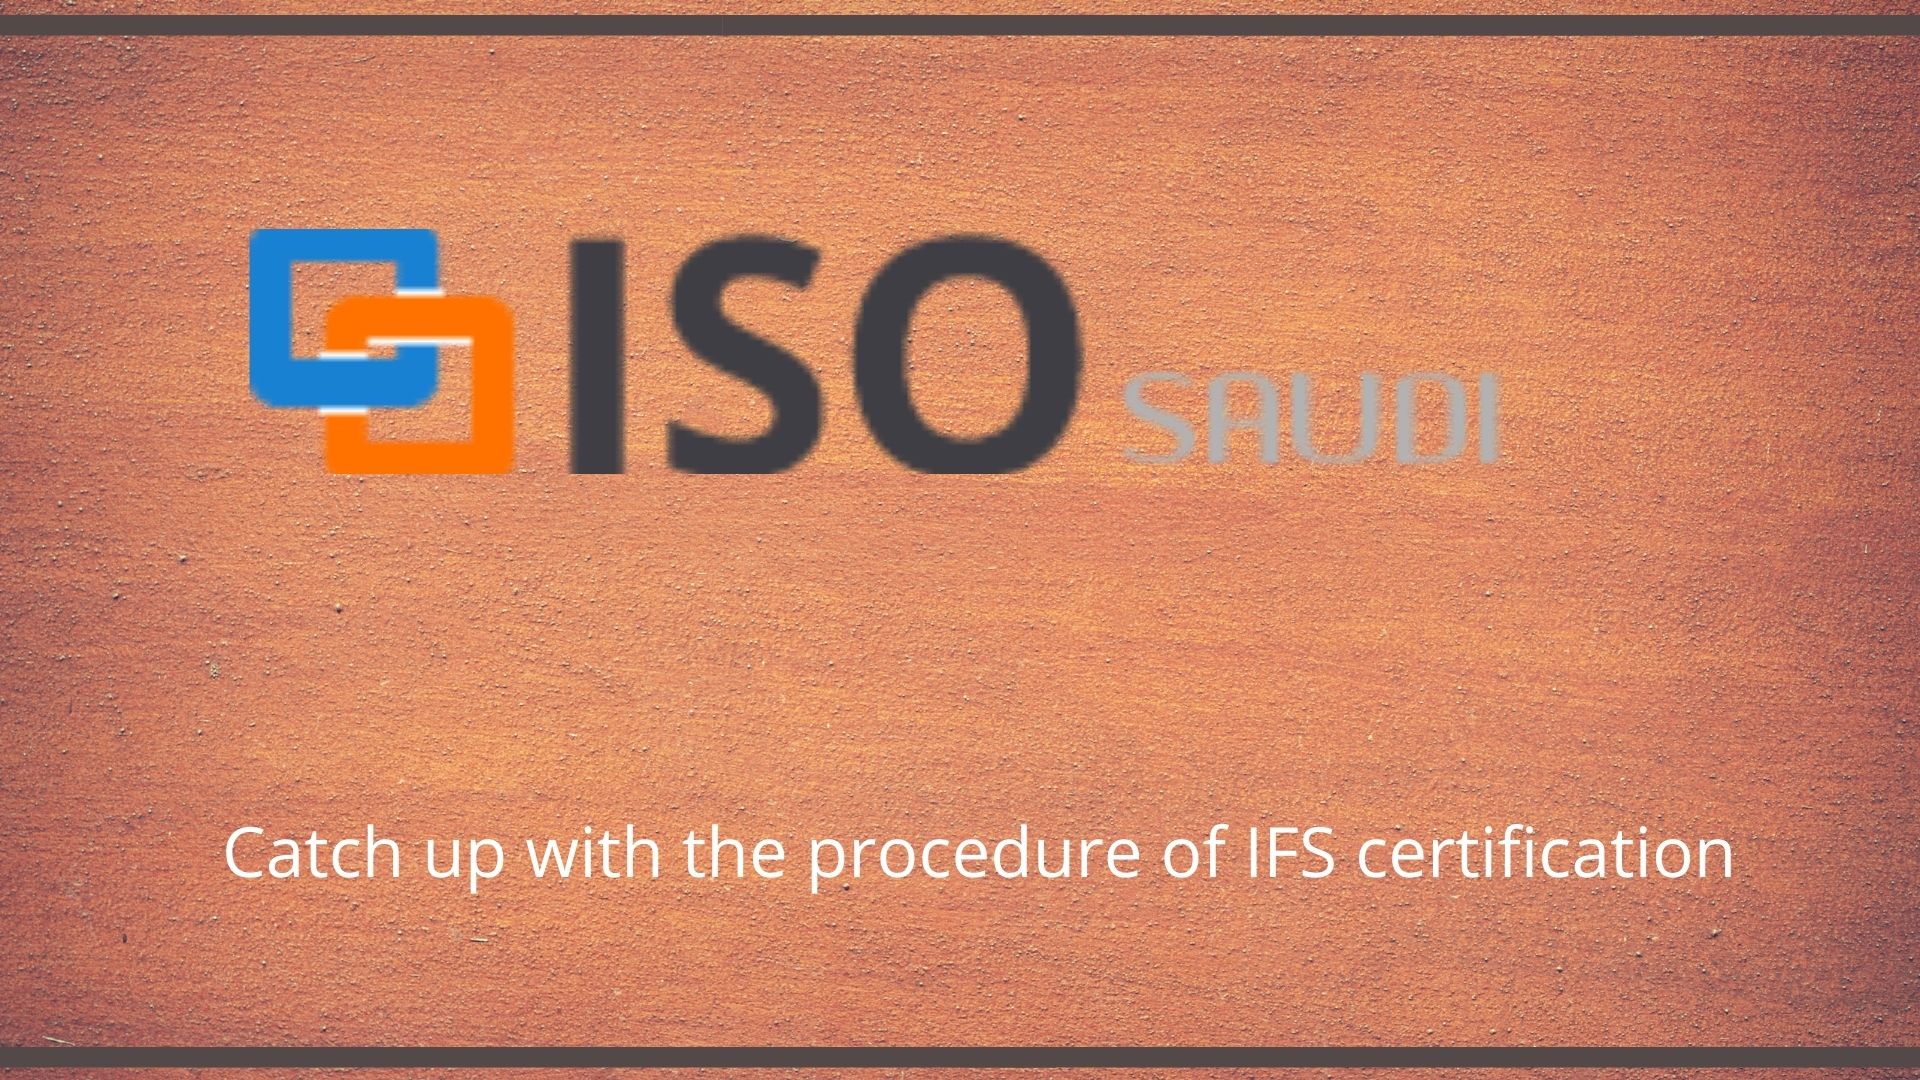 Catch up with the procedure of IFS certification